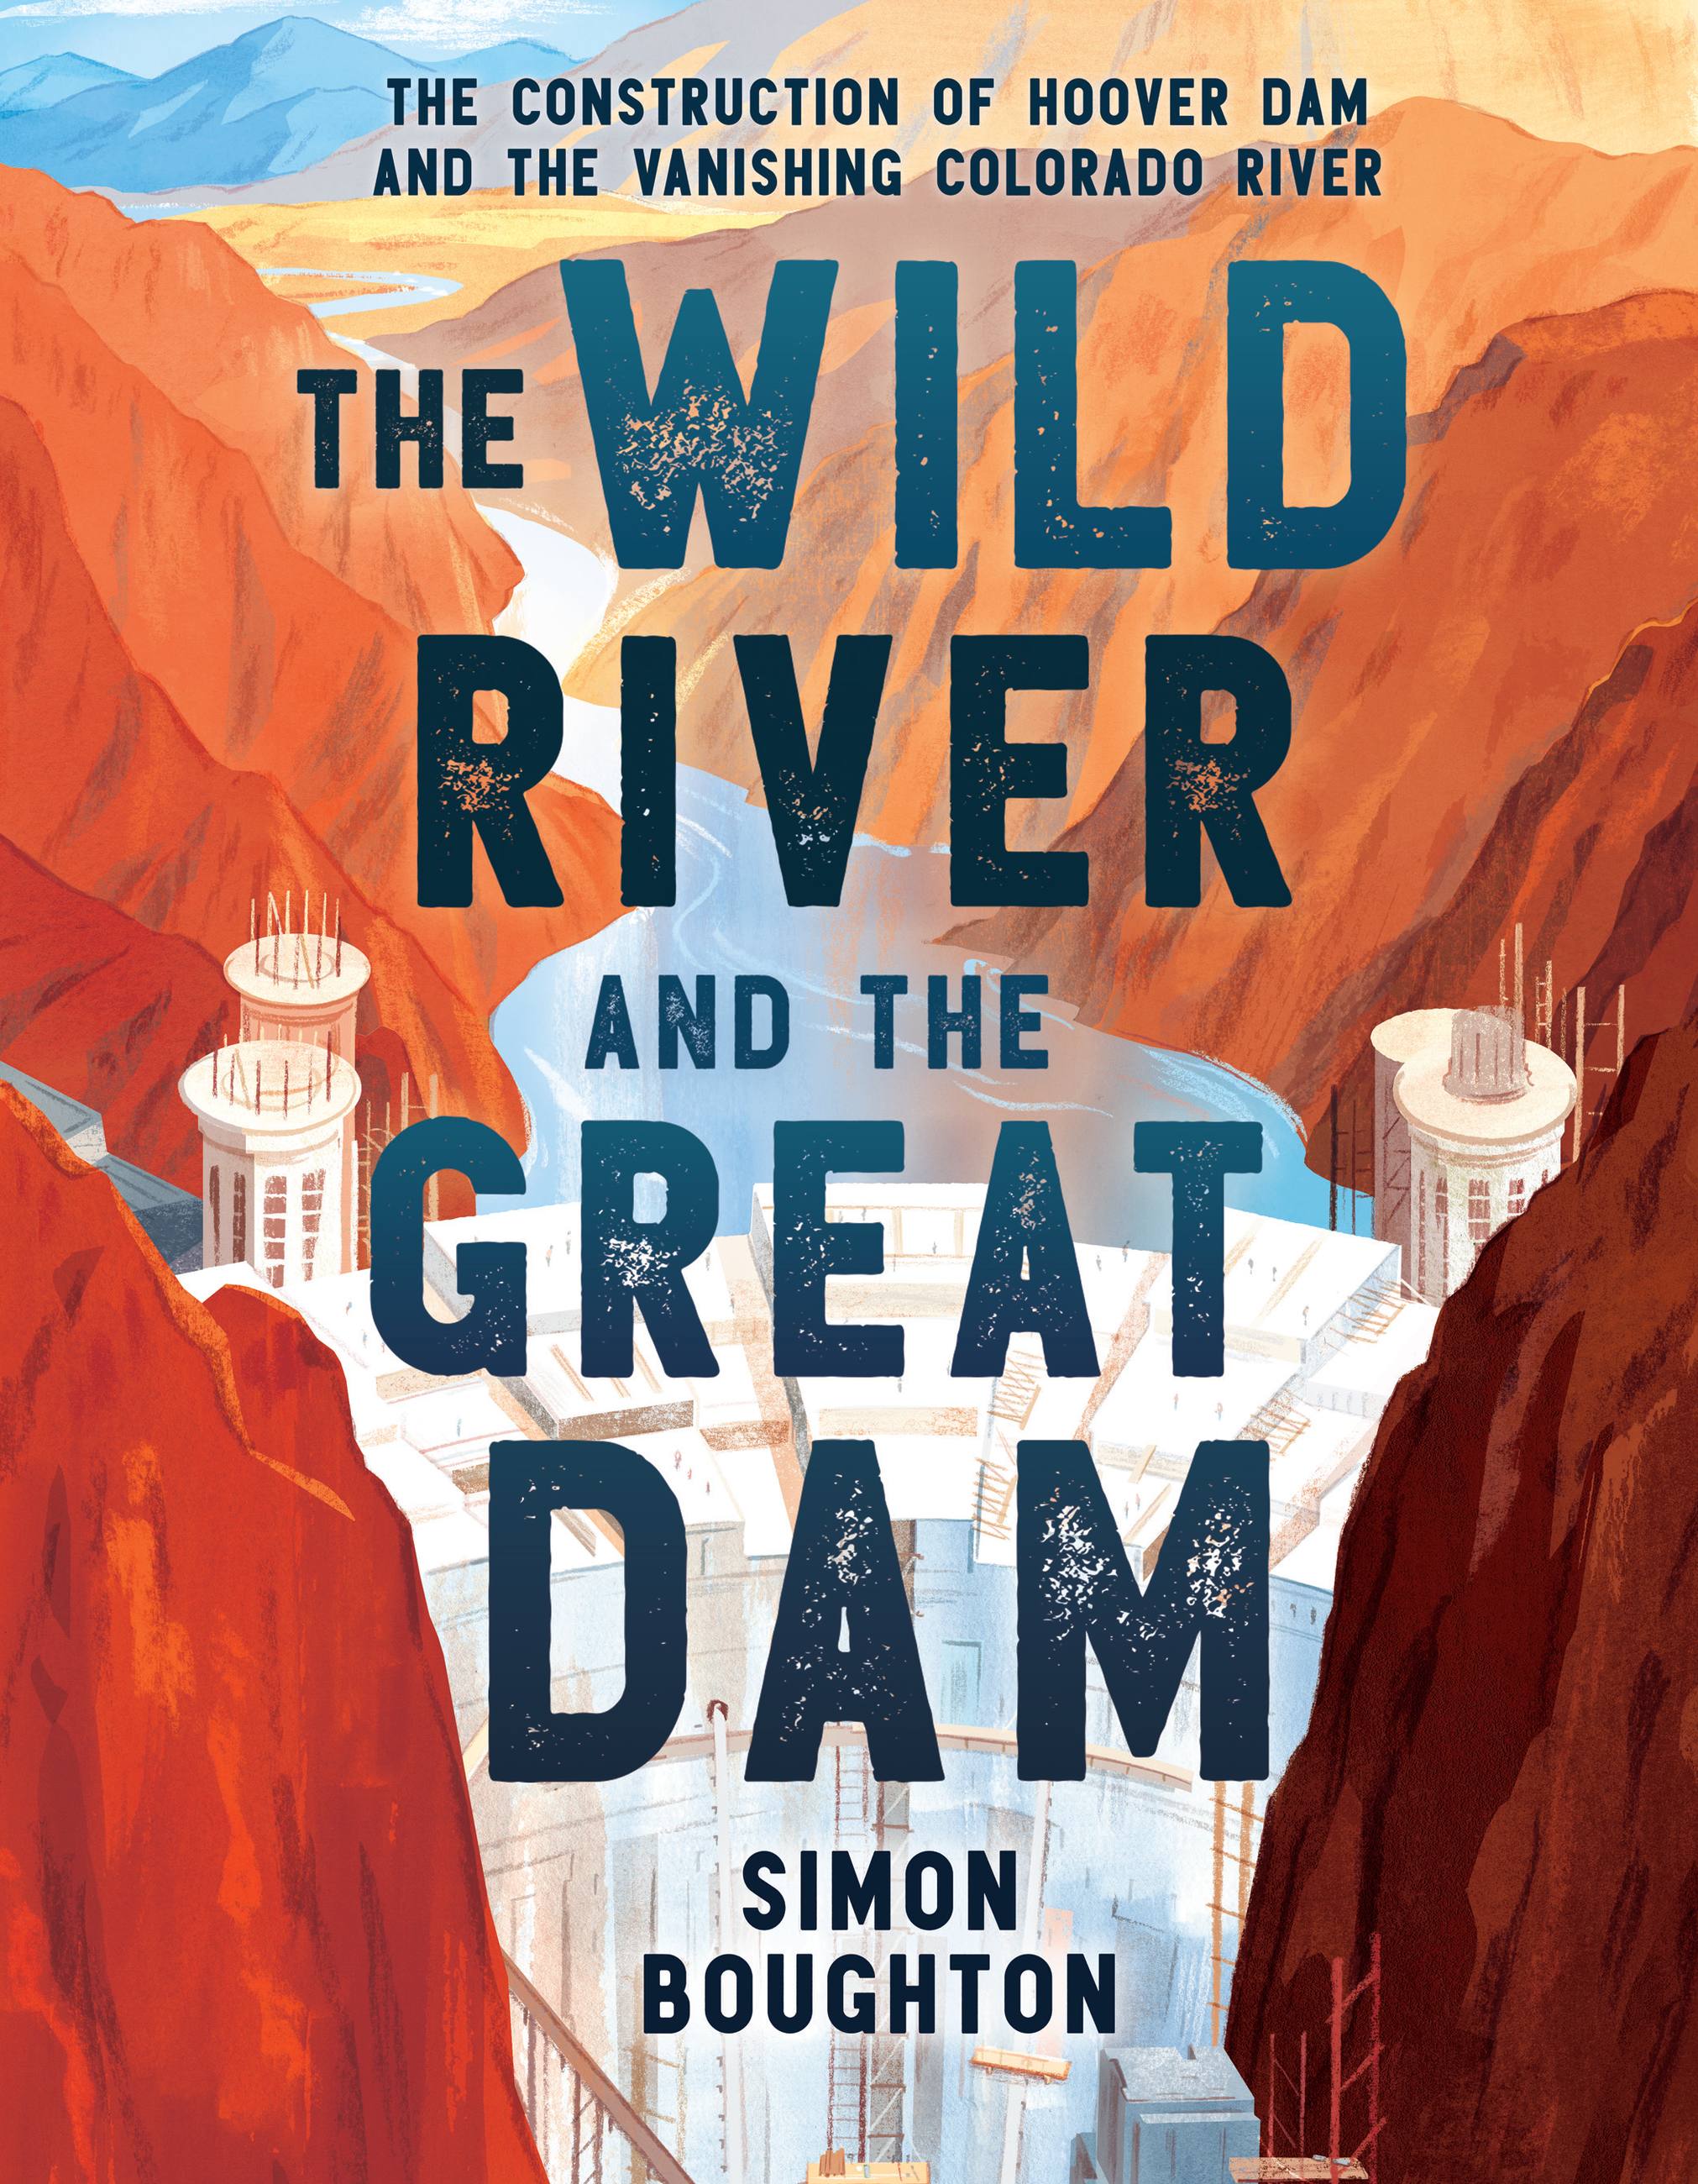 The Wild River and the Great Dam by Simon Boughton